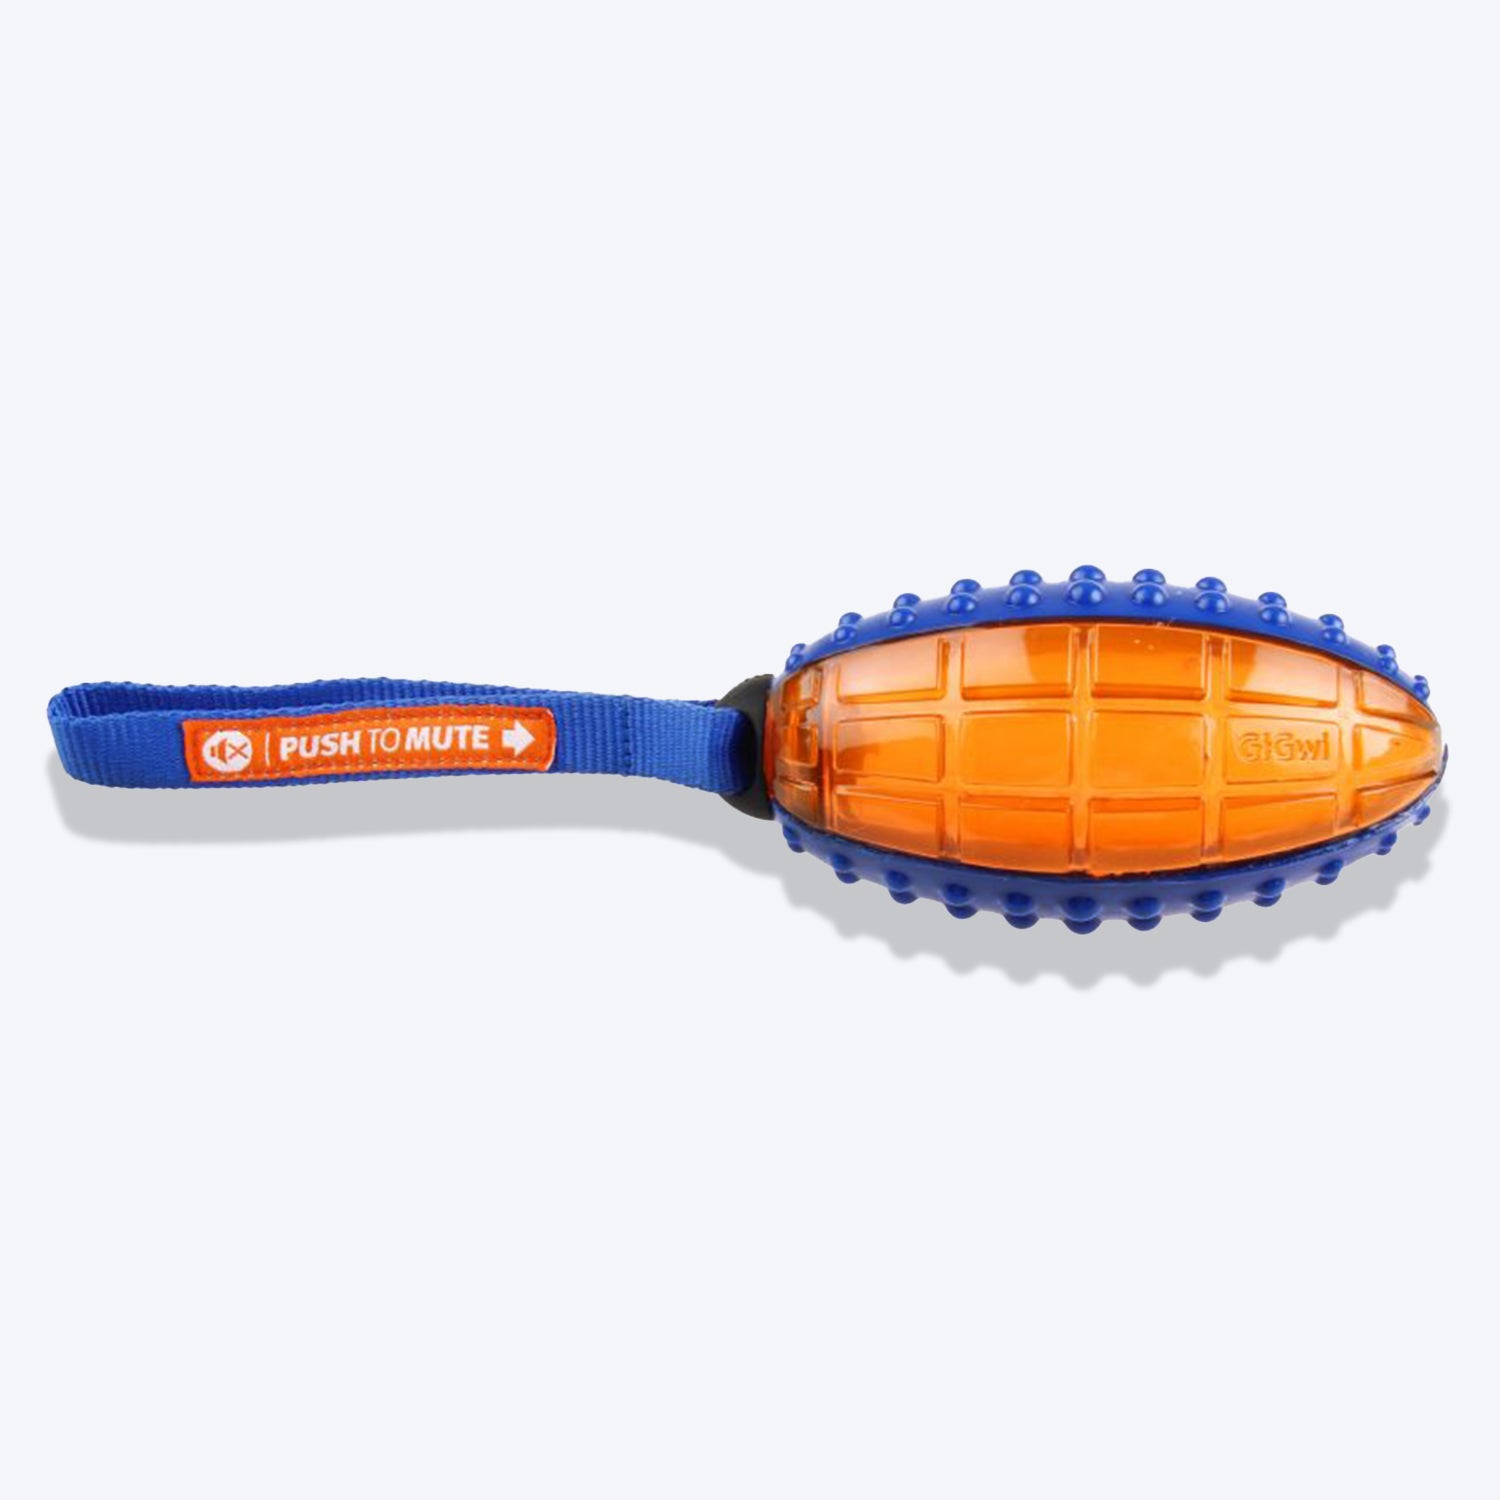 GiGwi Push To Mute Dog Chew Toy - Rugby Ball (Solid/Transparent) - Blue/Orange - Heads Up For Tails